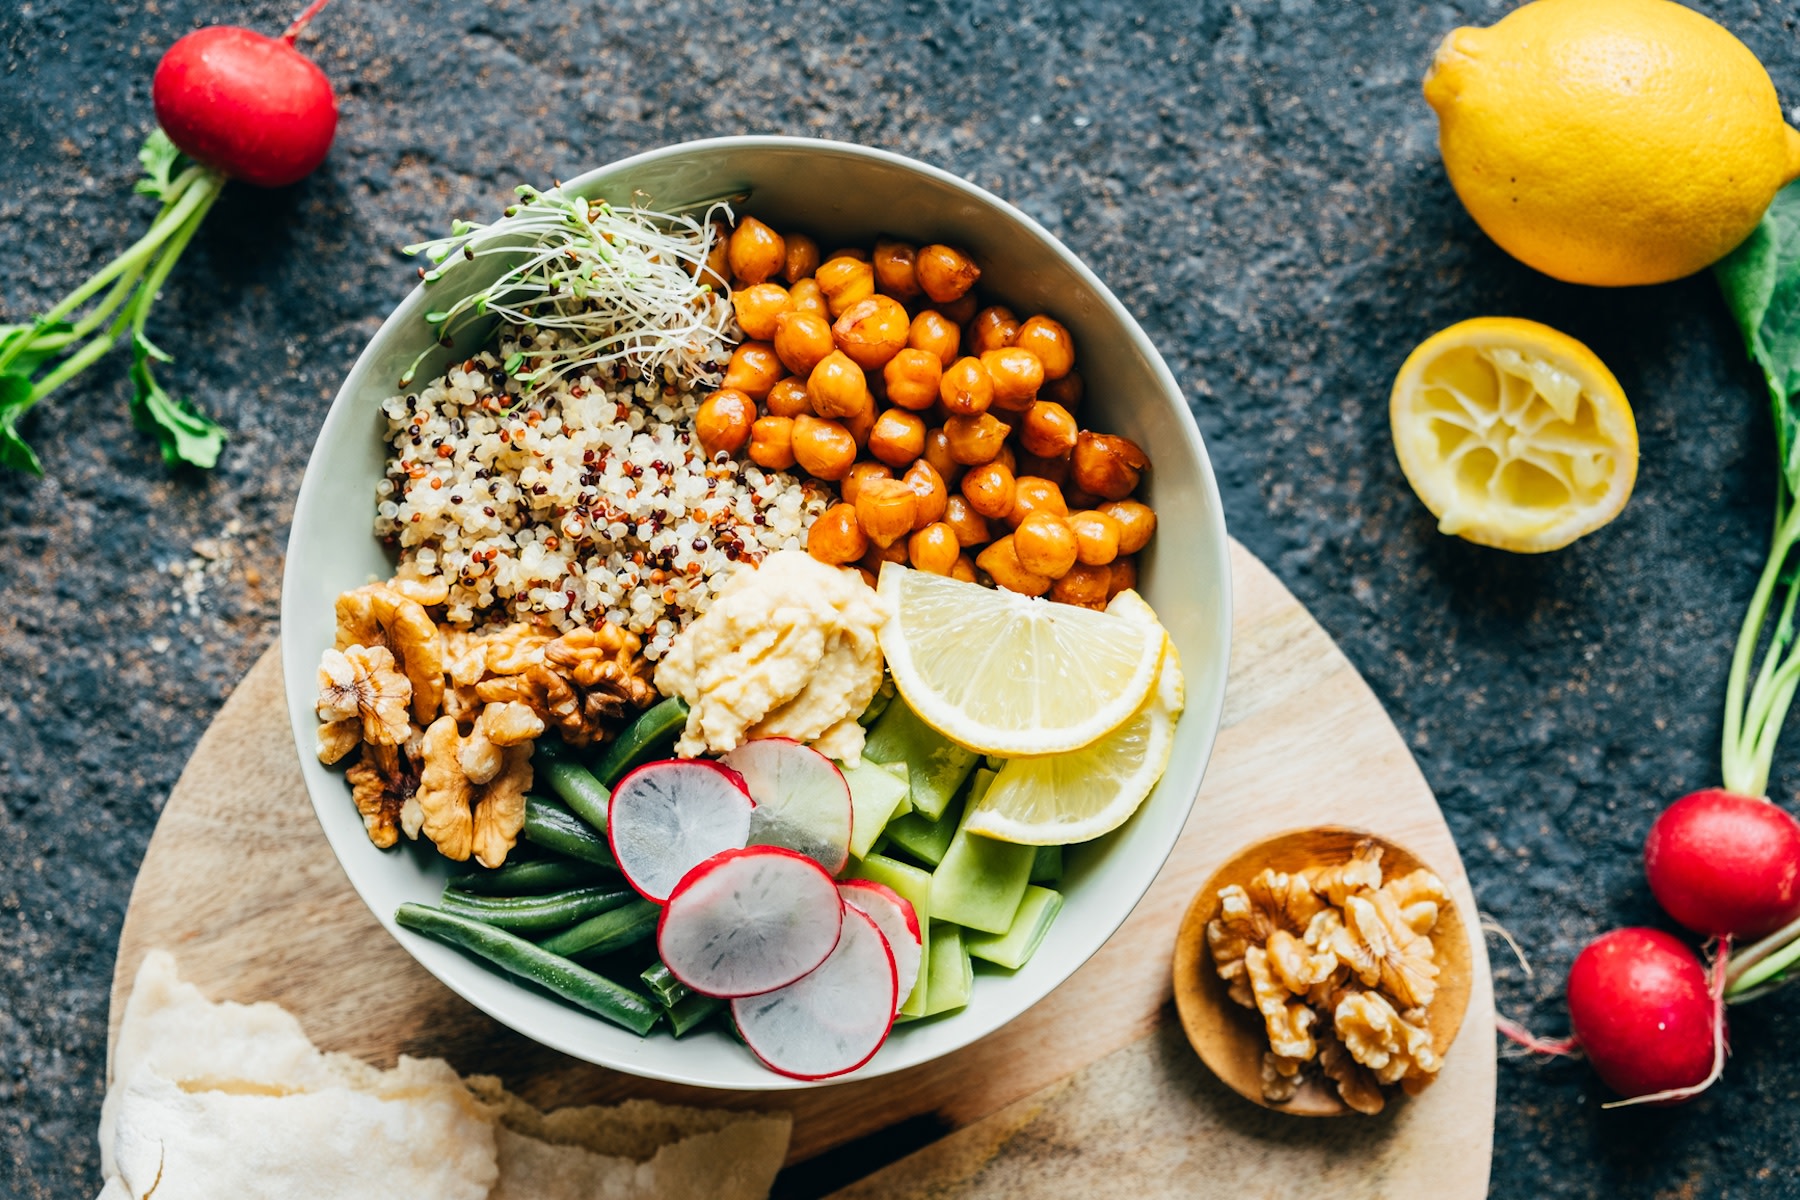 A nourishing bowl of food with plant-based protein sources like quinoa and chickpeas.